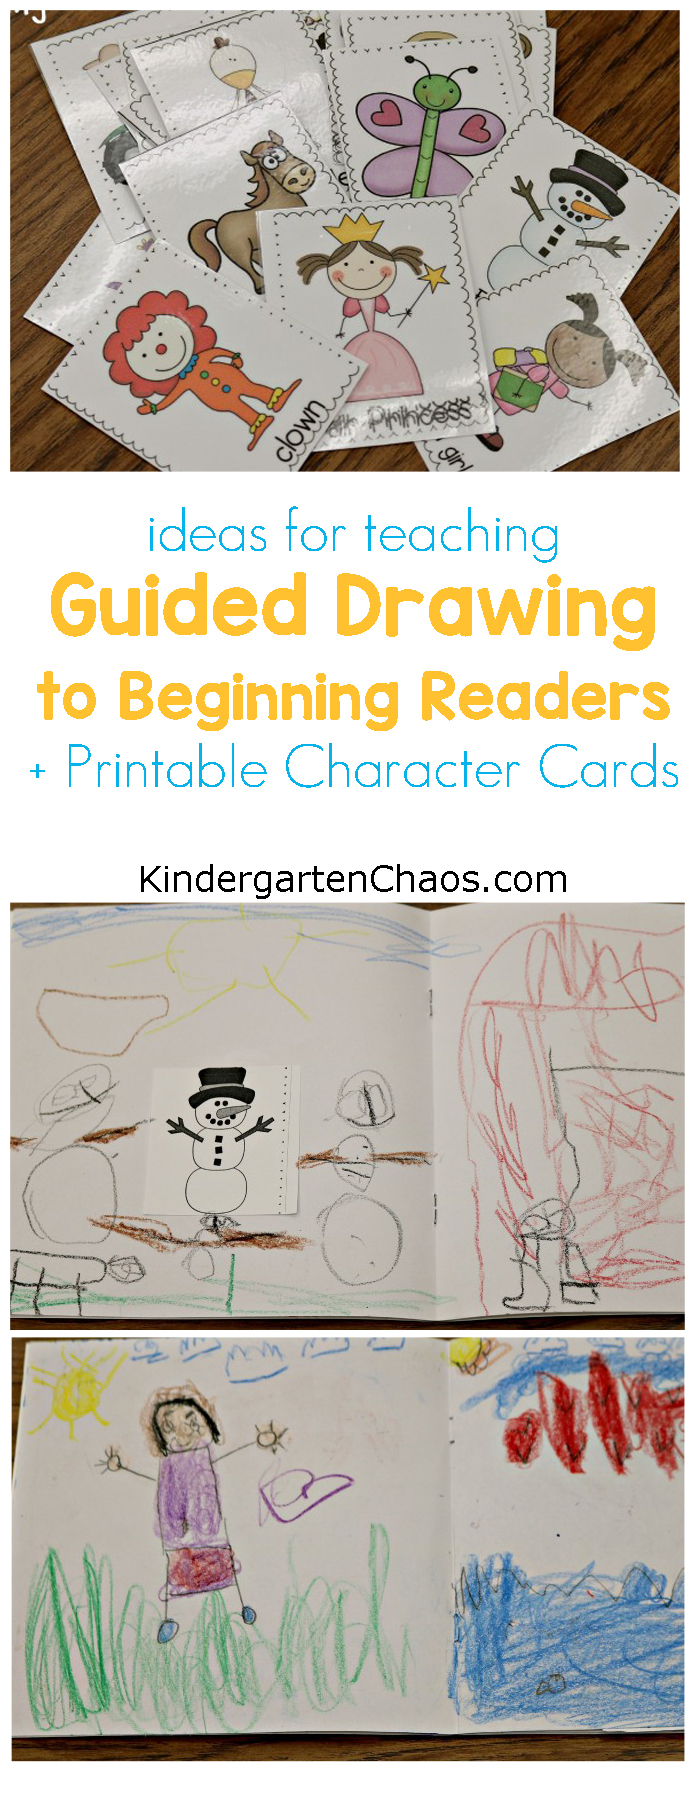 Teaching Guided Drawing To Beginning Readers + Printable Character Cards